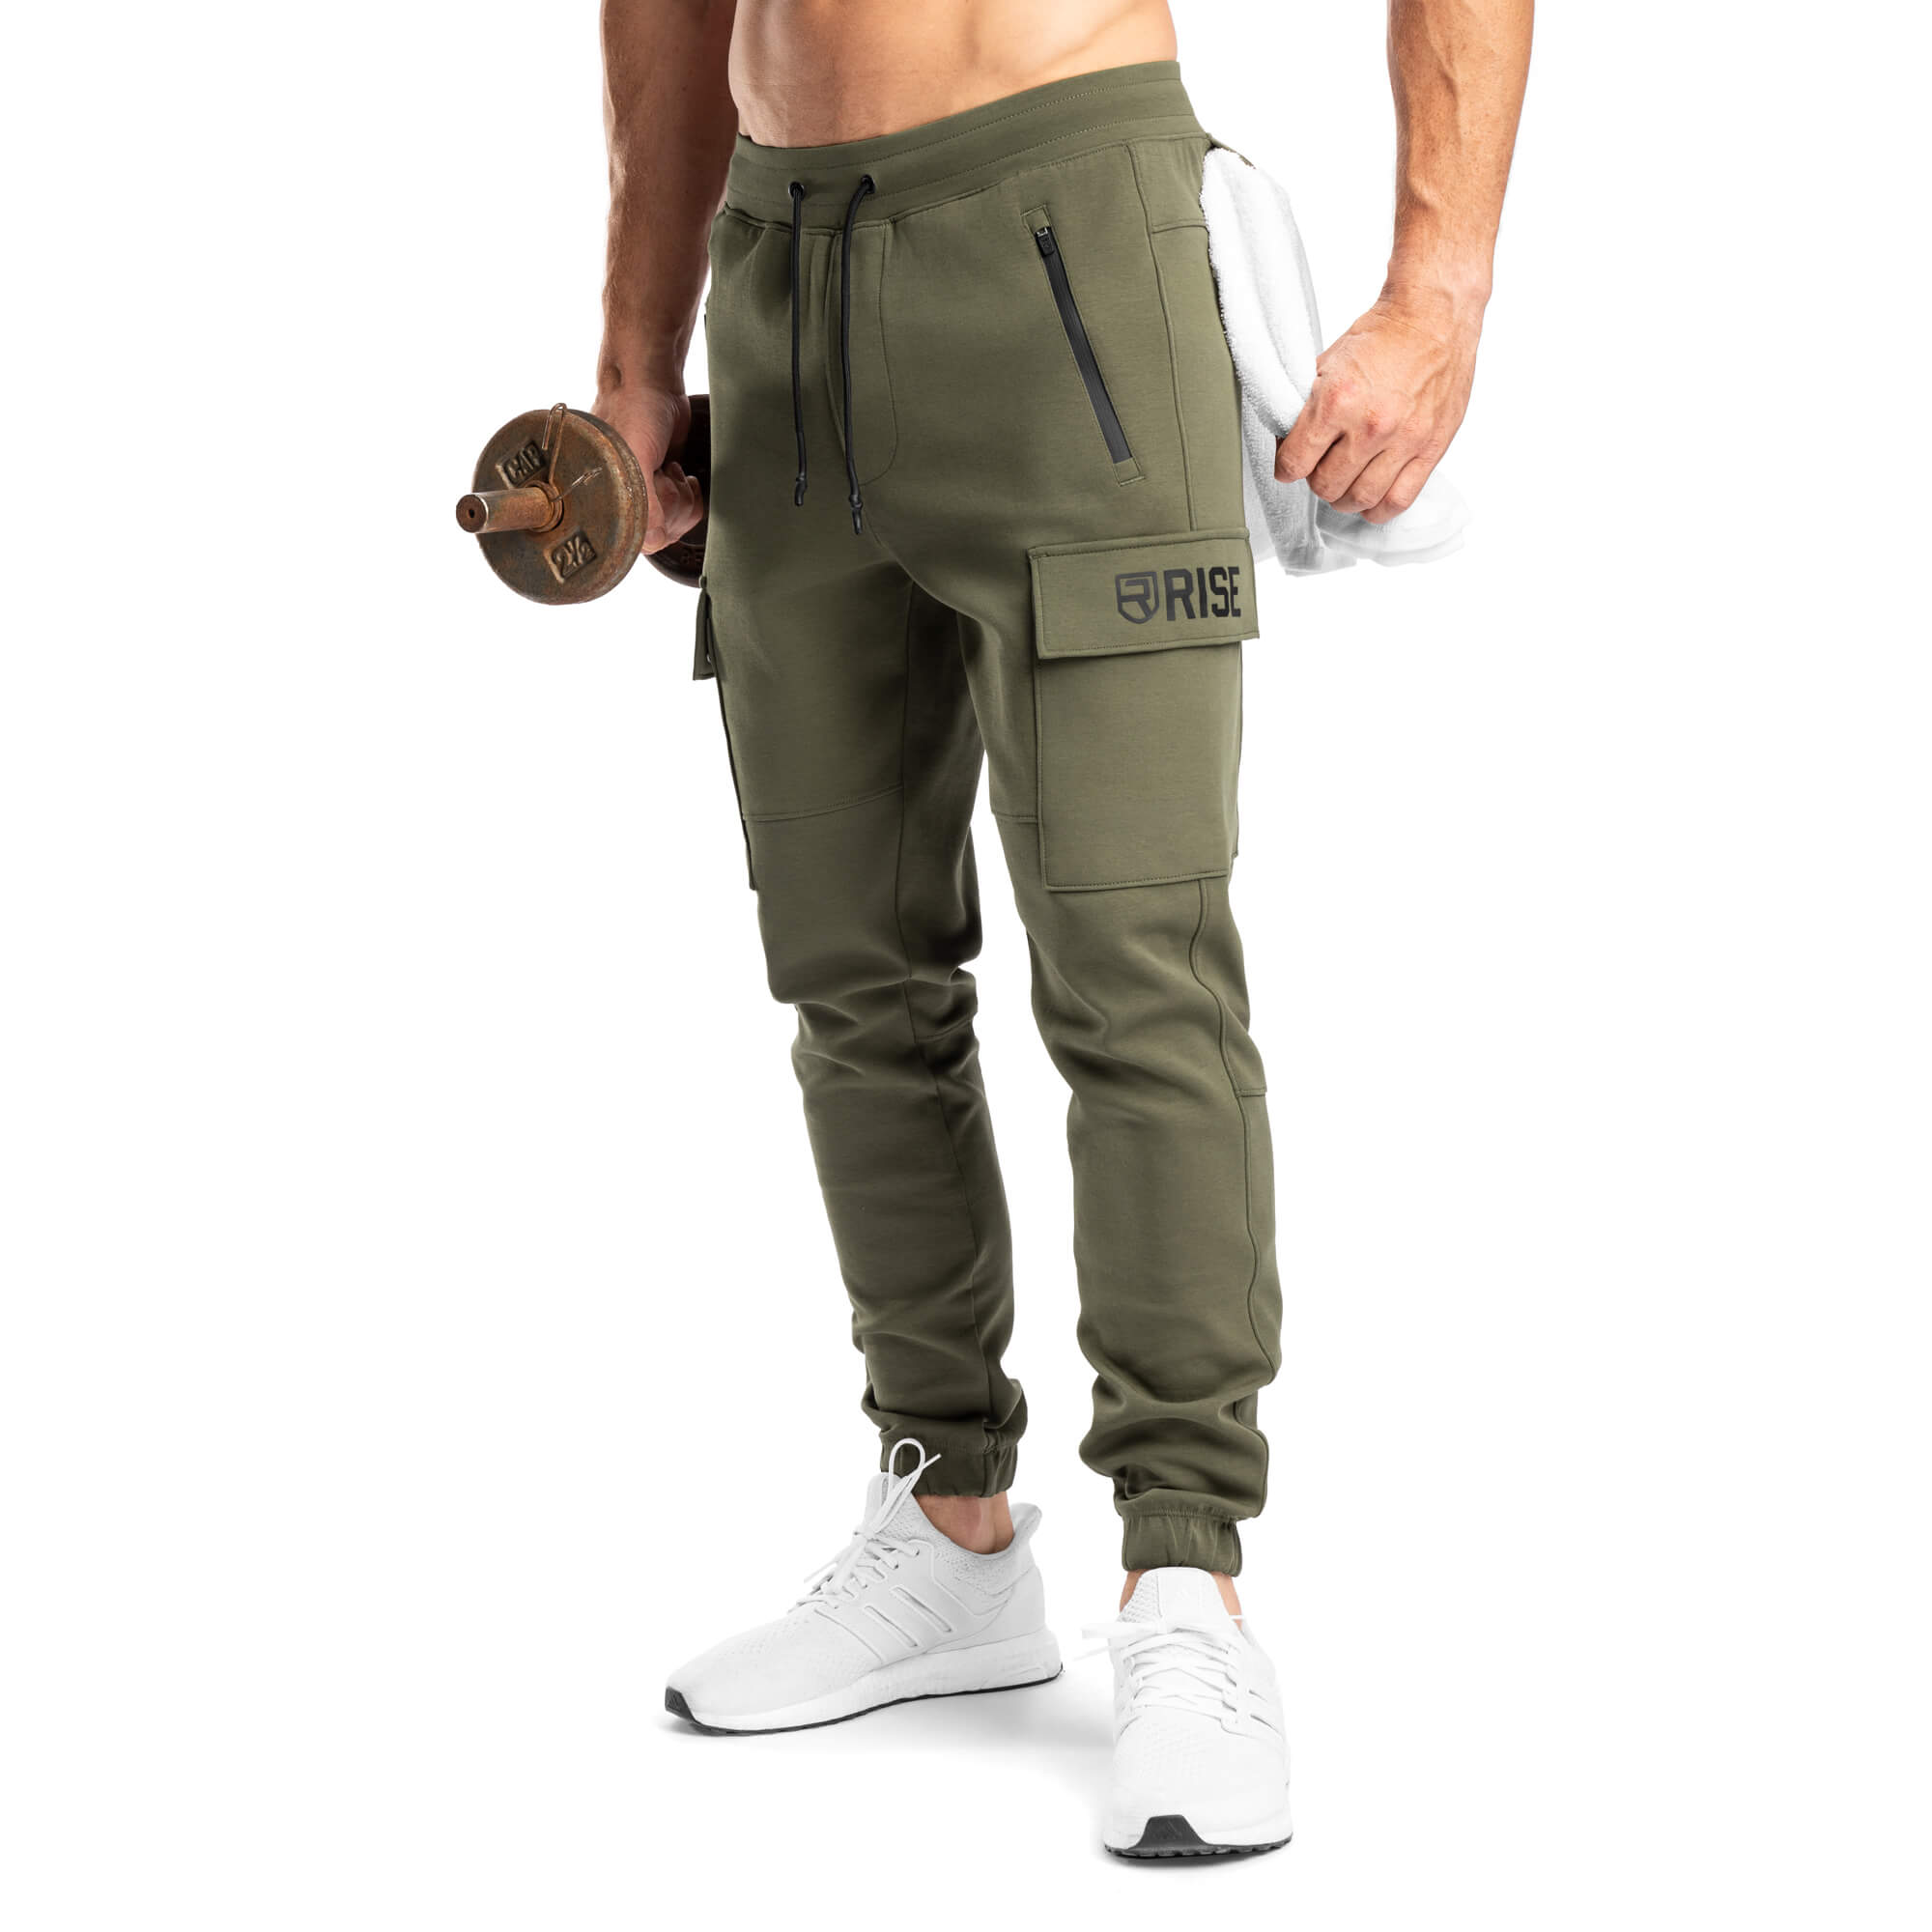 Rest Later Pants - Army Green